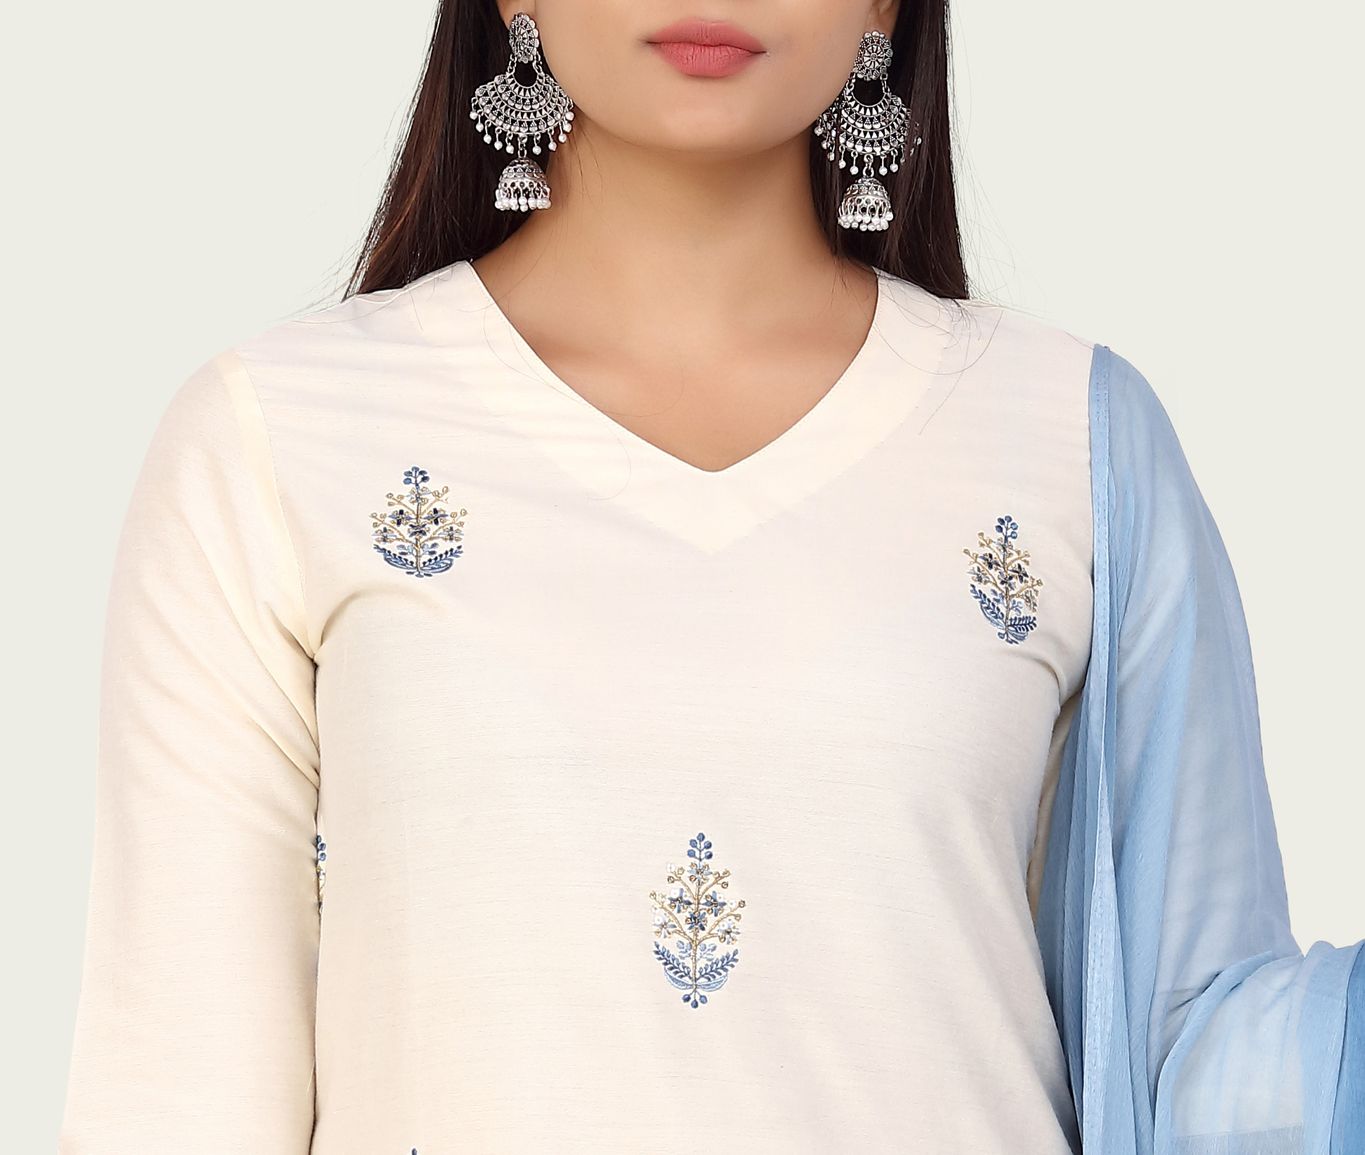 Maha Cream Cotton Embroidered Suit Sets